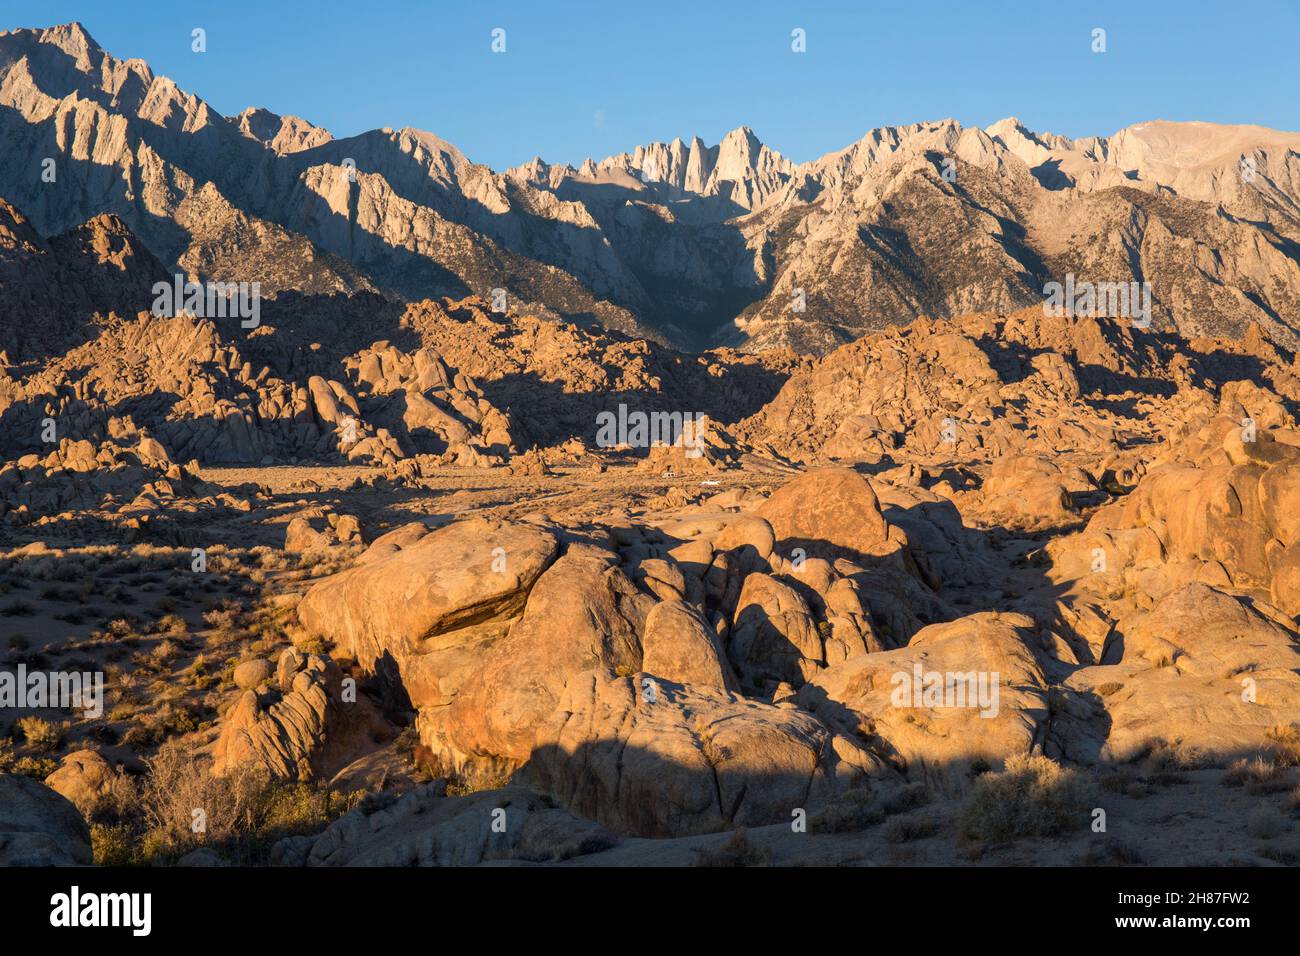 Alabama Hills National Scenic Area, Lone Pine, California, USA. View across rocky desert landscape to Mount Whitney and the Sierra Nevada, sunrise. Stock Photo